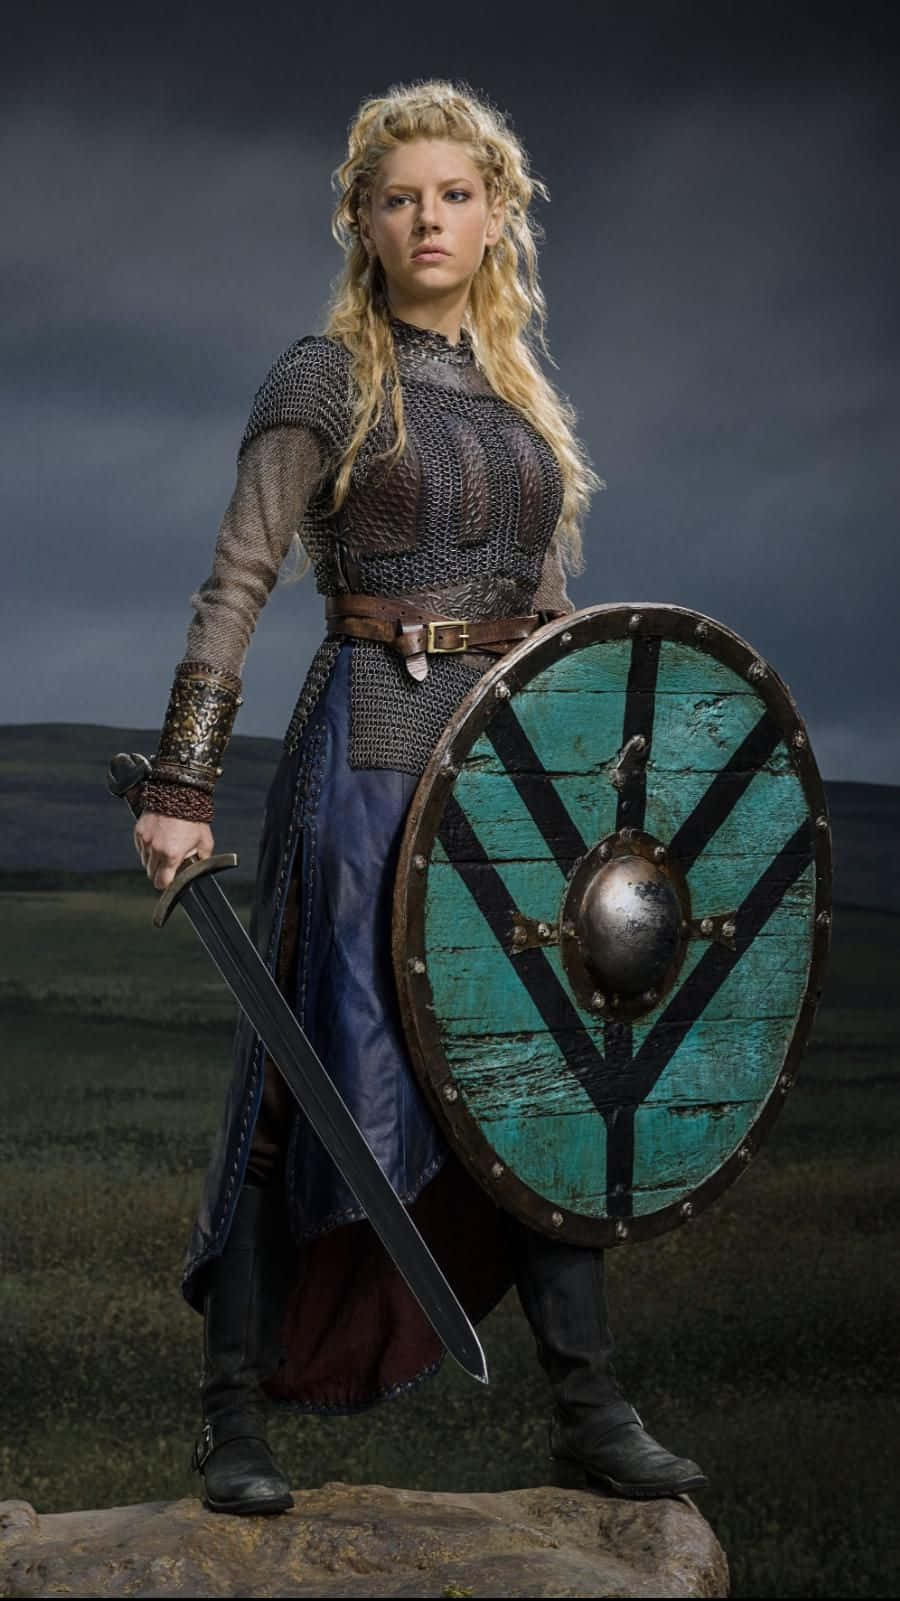 These brave female Viking warriors prove that even in a male-dominated world, women can rise above to defend their honor and beliefs.